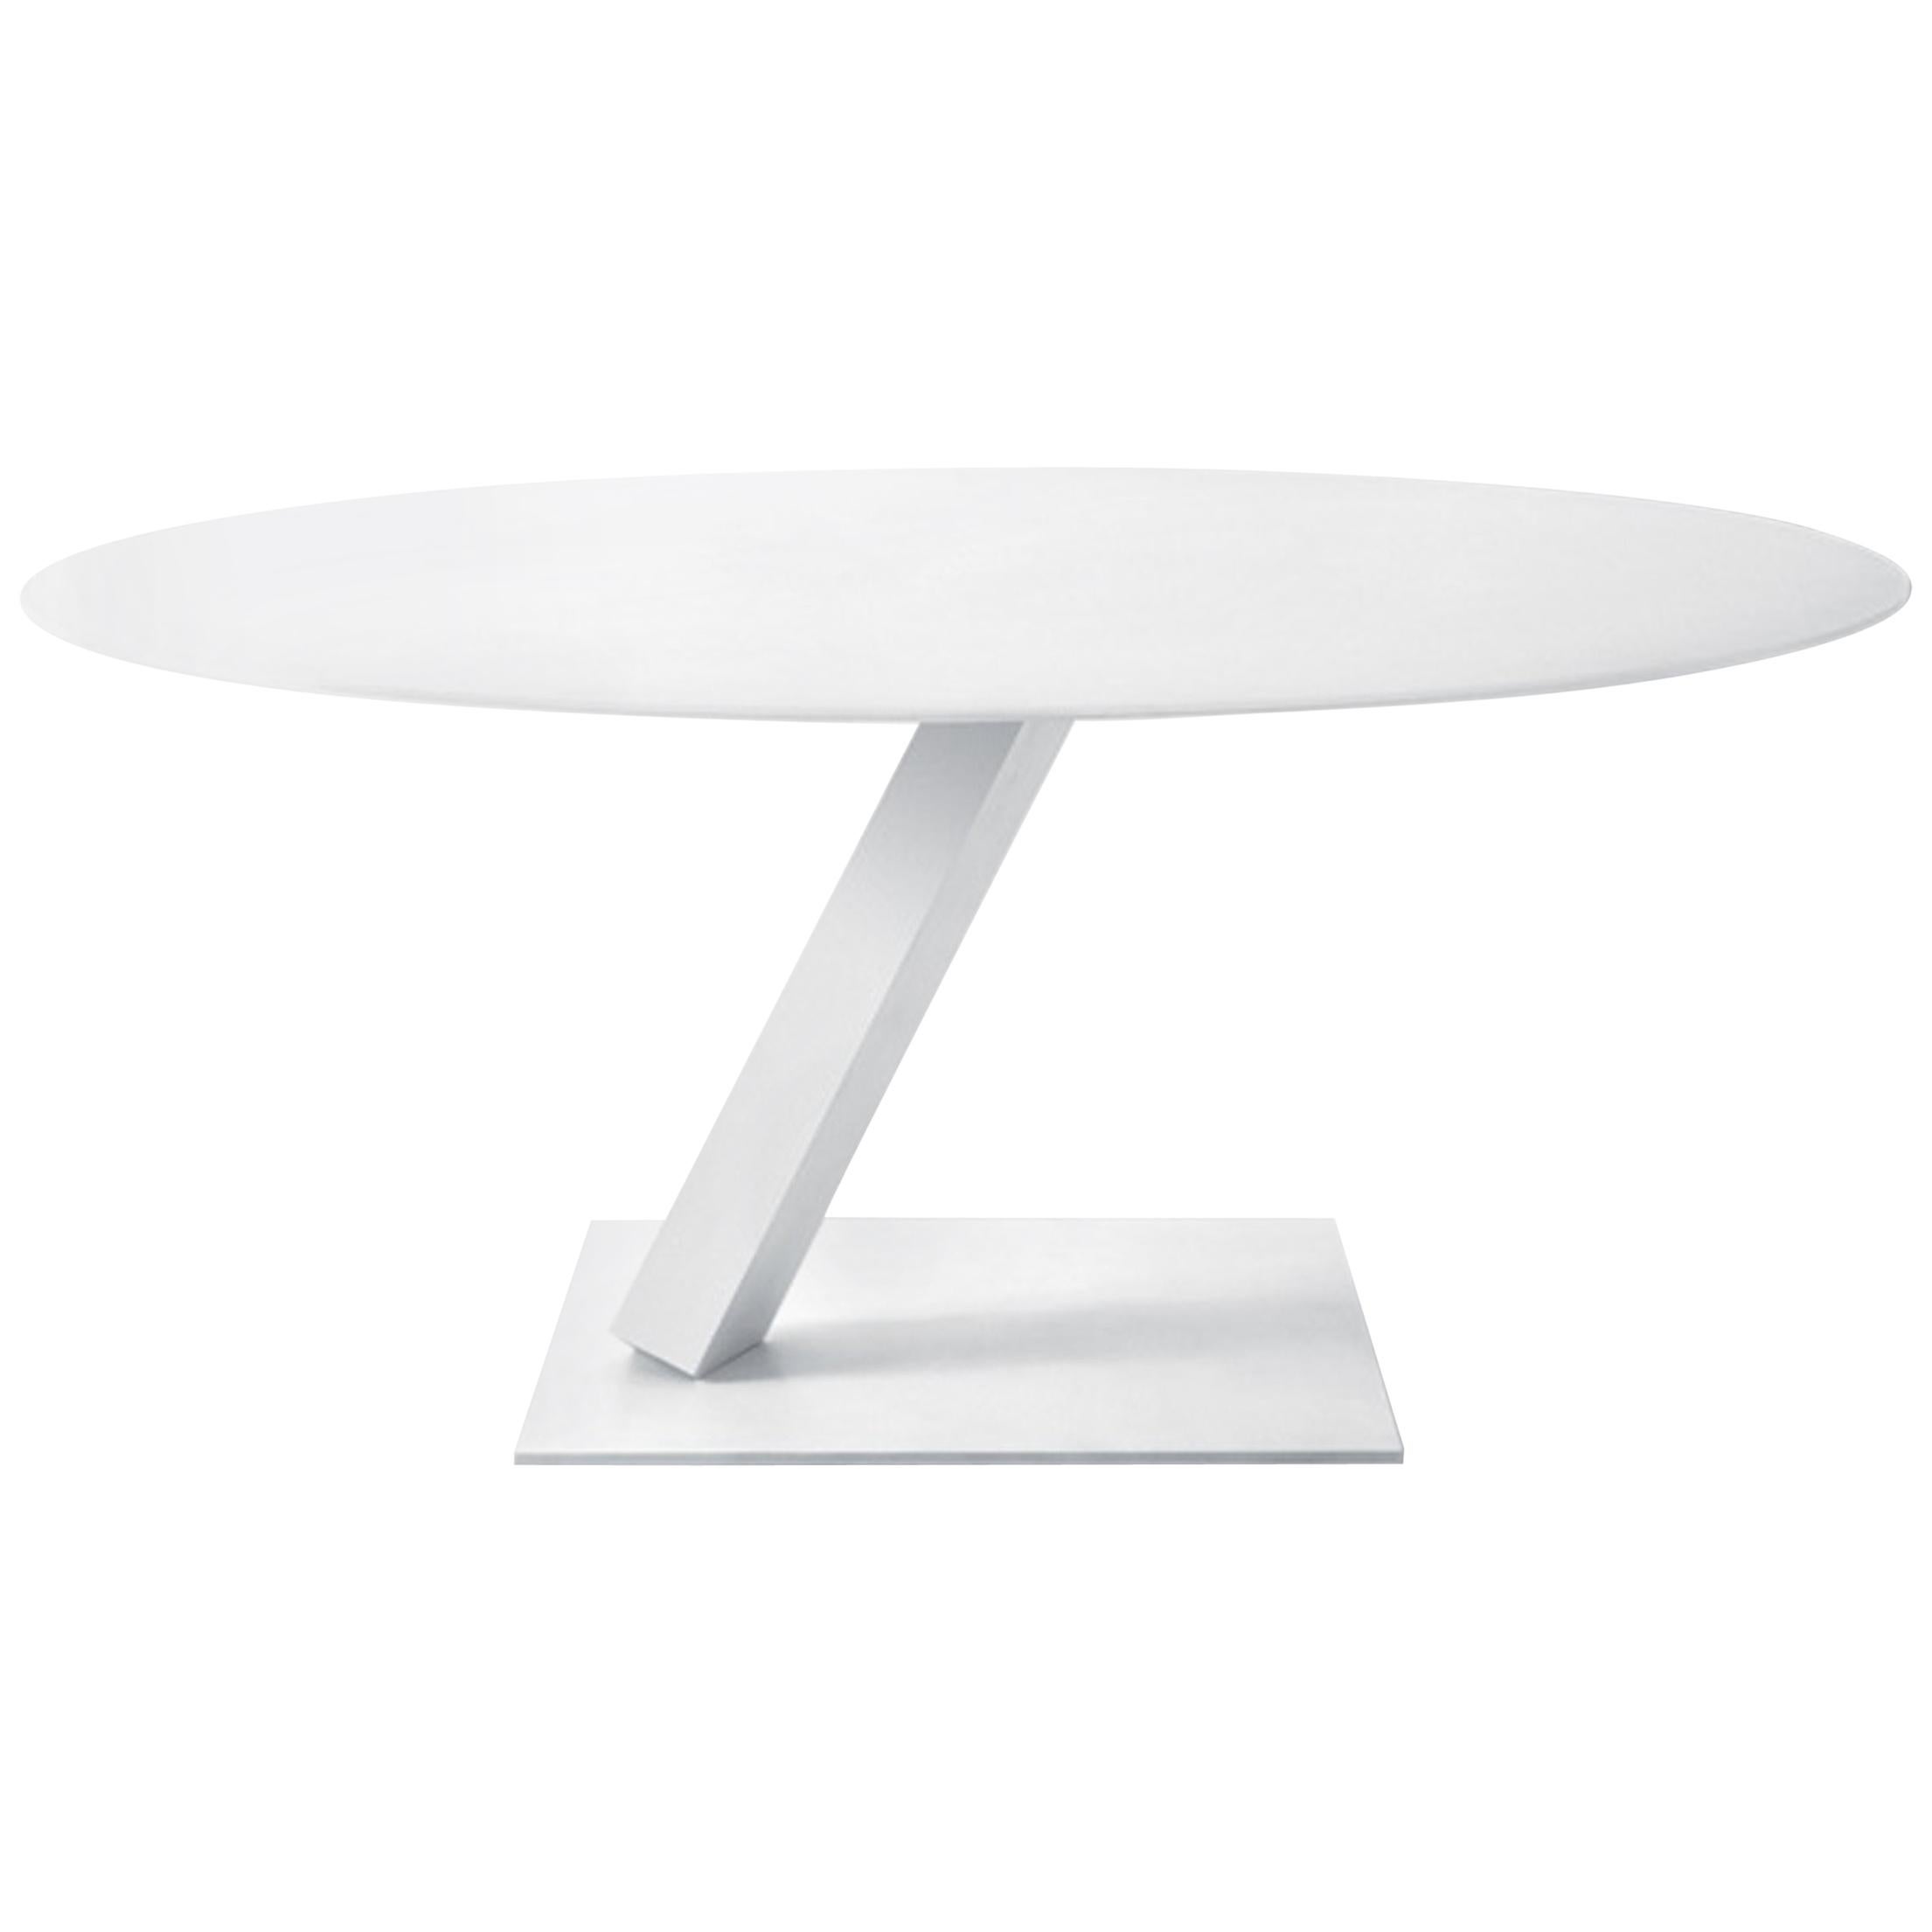 Customizable Desalto Element Round Table Designed by Tokujin Yoshioka For Sale